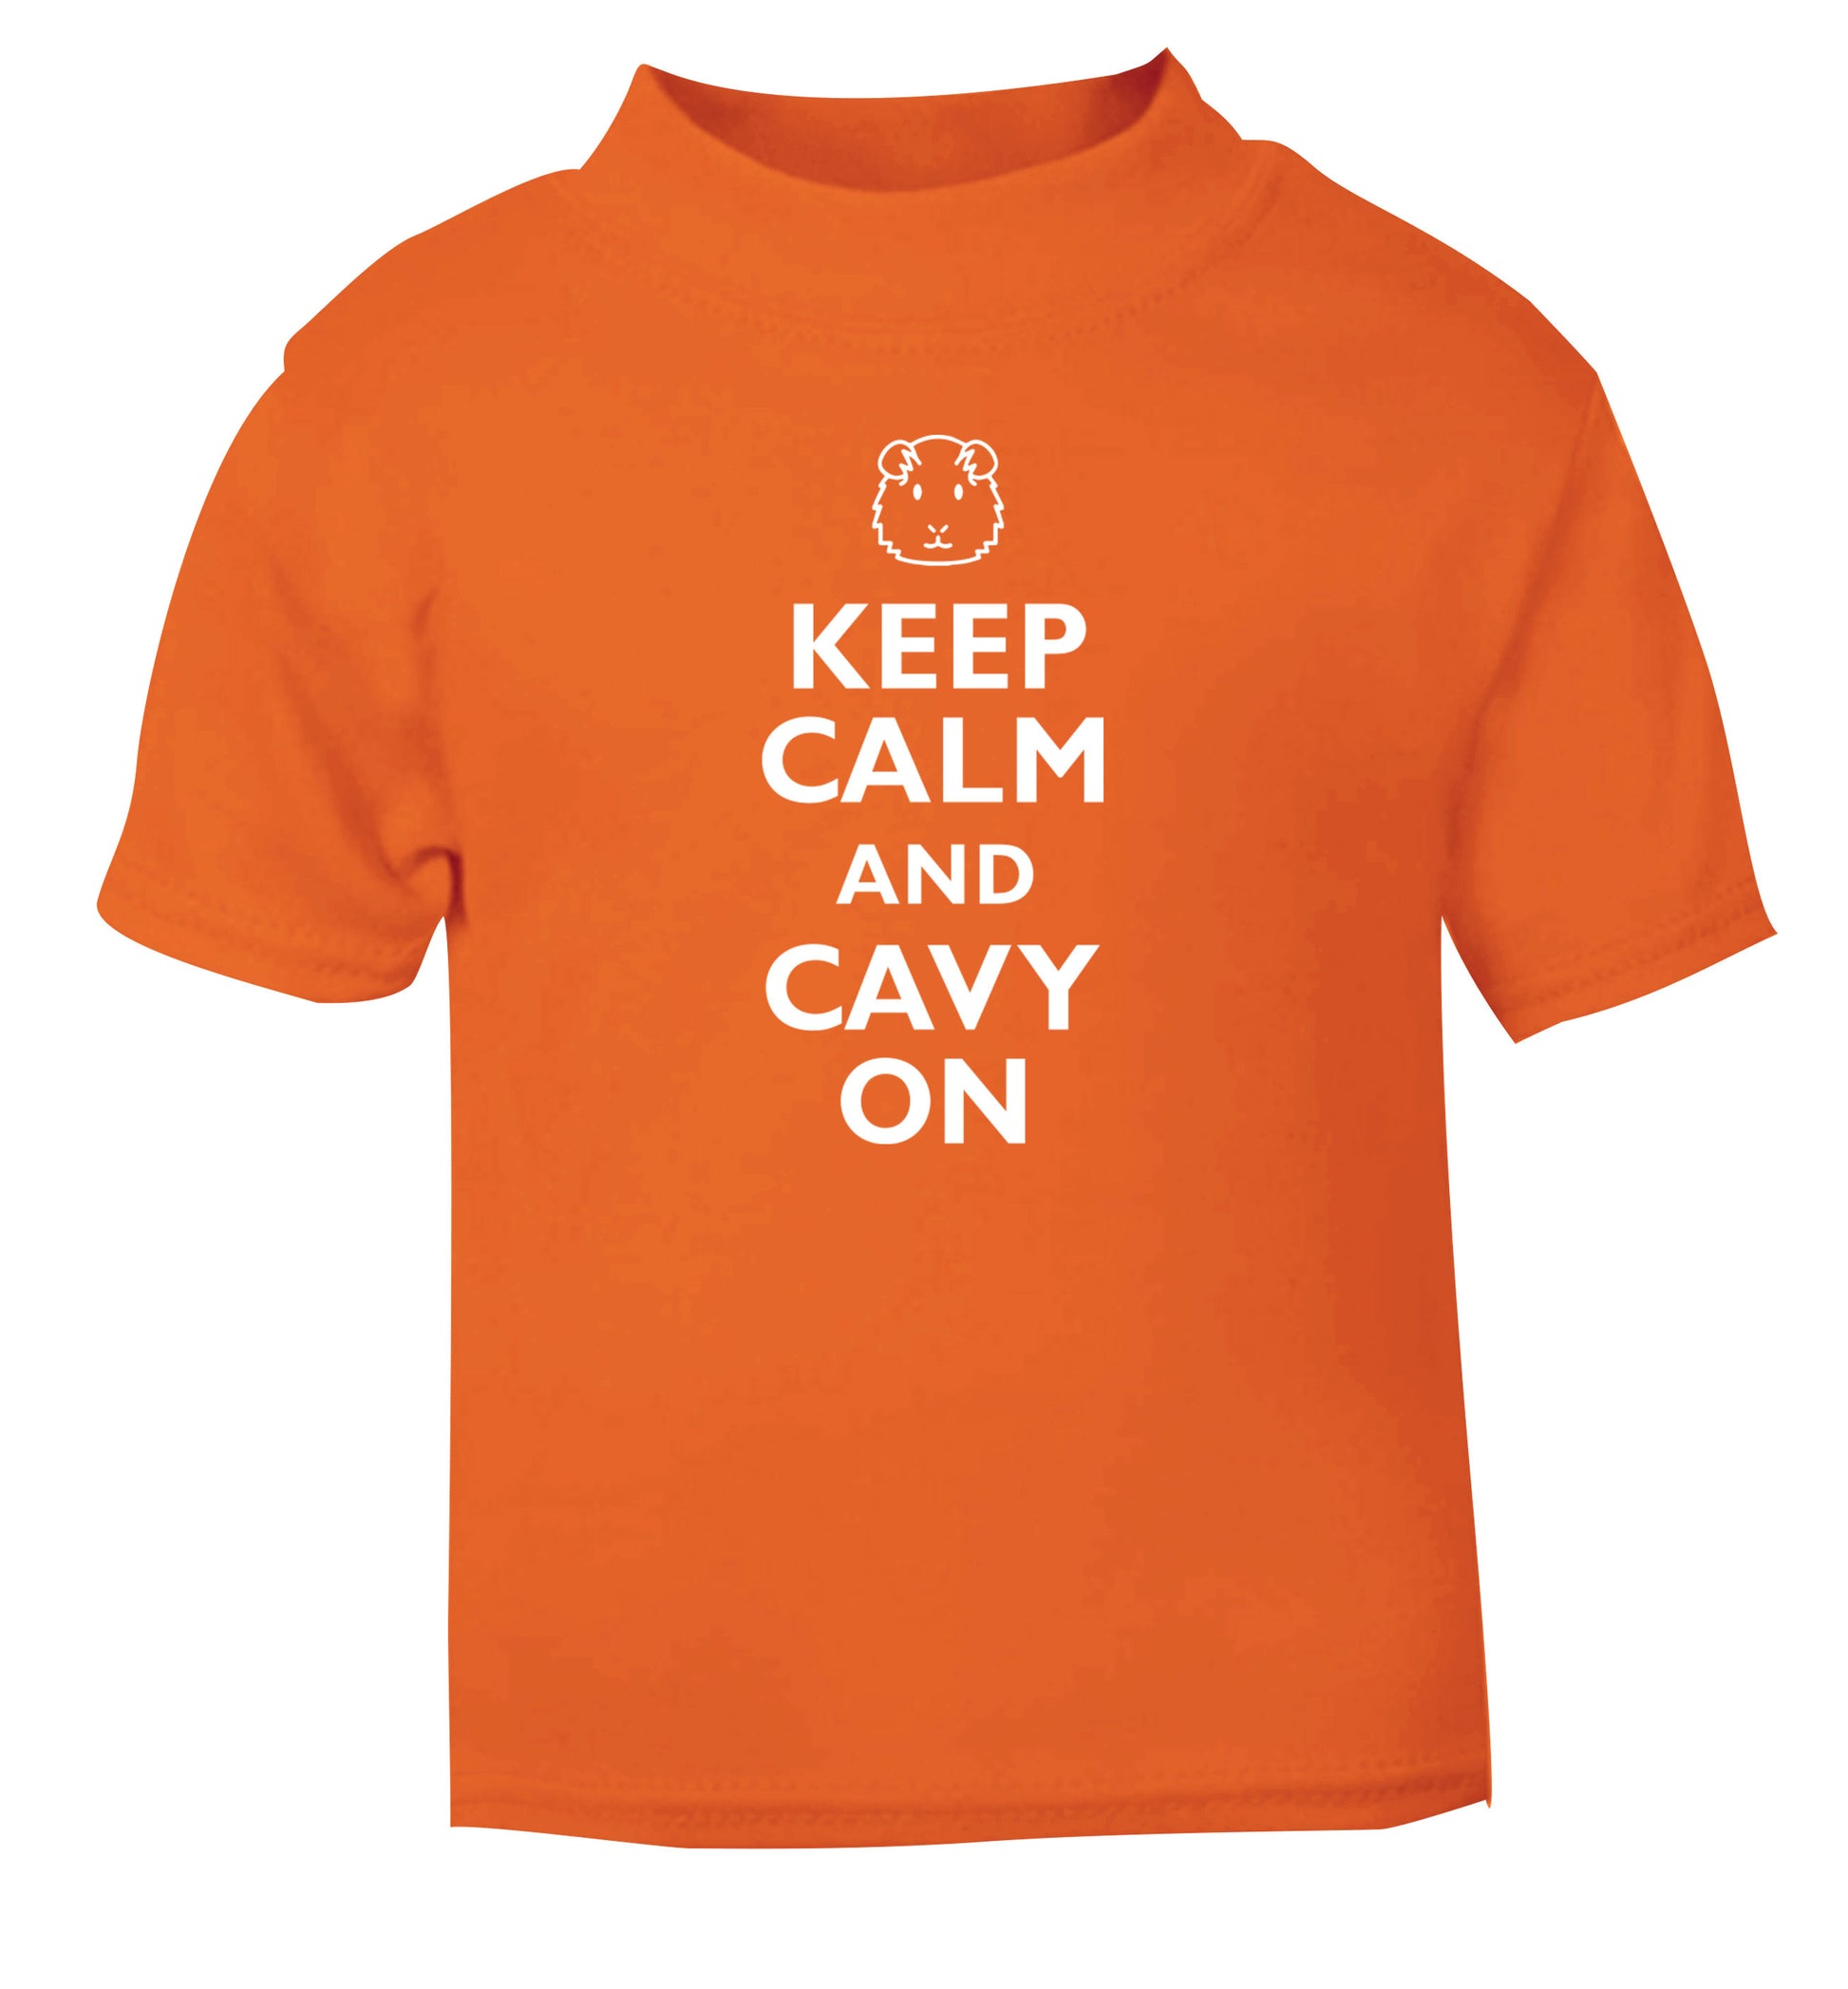 Keep calm and cavvy on orange Baby Toddler Tshirt 2 Years